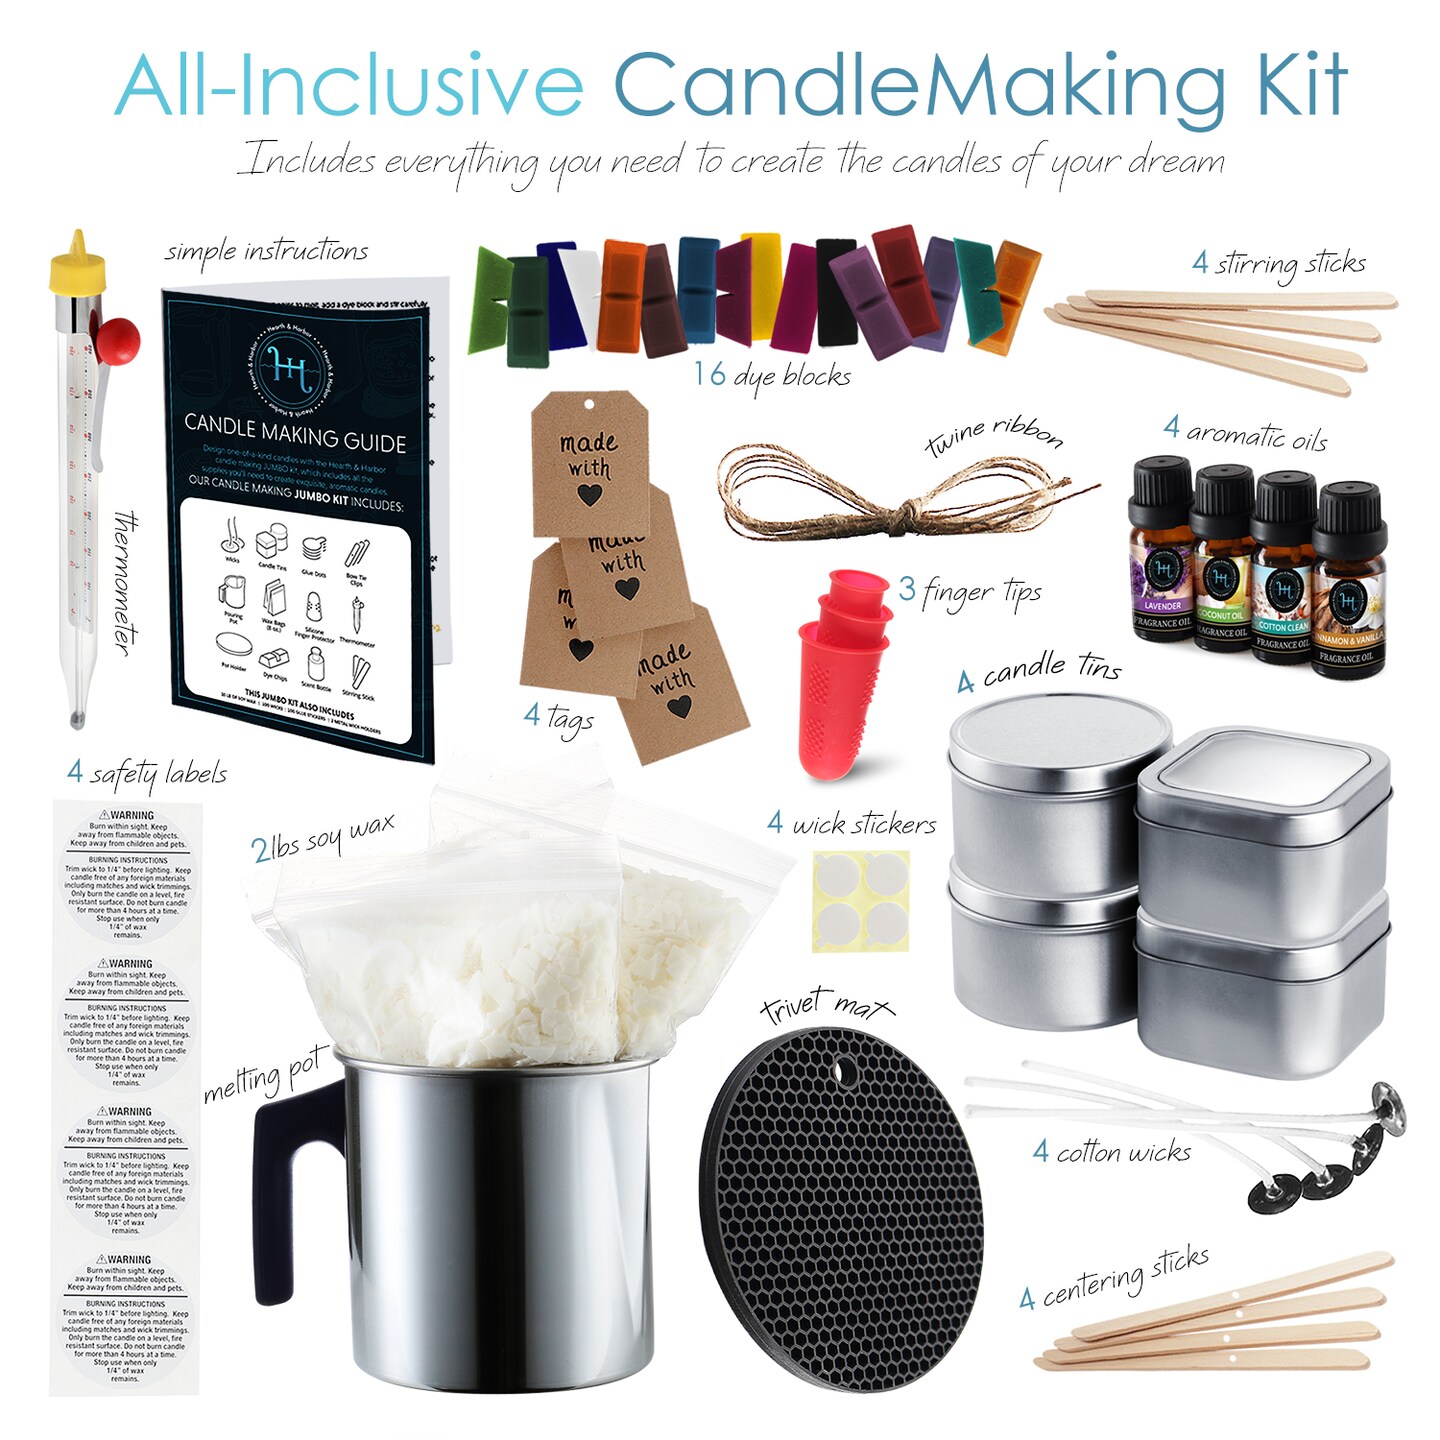 Hearth & Harbor DIY Natural Soy Candle Making Kit with Dried Flowers